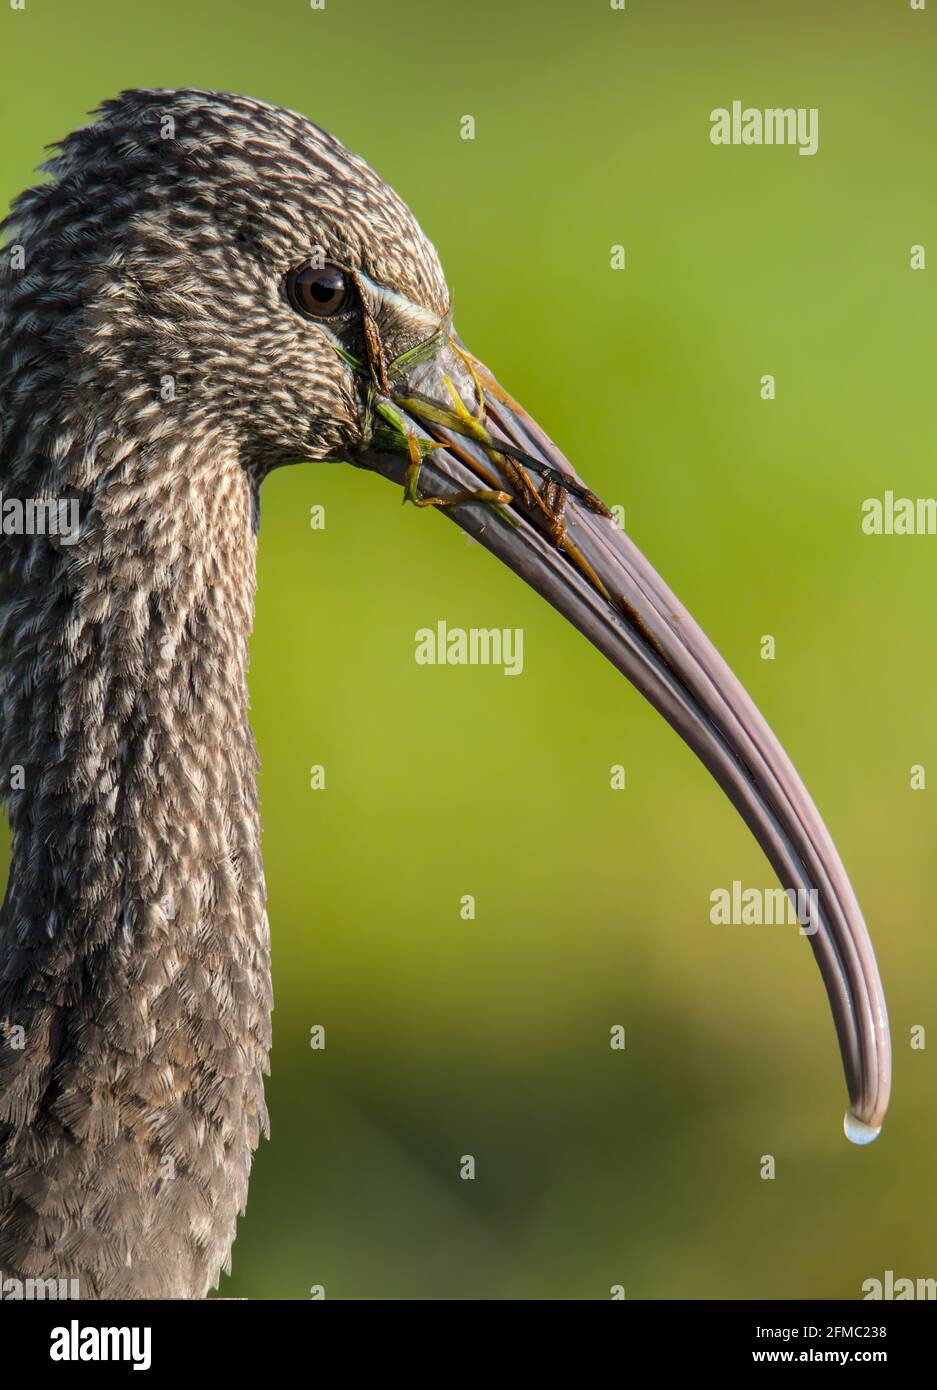 Closeup Of The Head Of A Glossy Ibis, Plegadis falcinellus, In Profile With Grass On Its Curved Beak Isolated Against A Diffuse Green Background Stock Photo